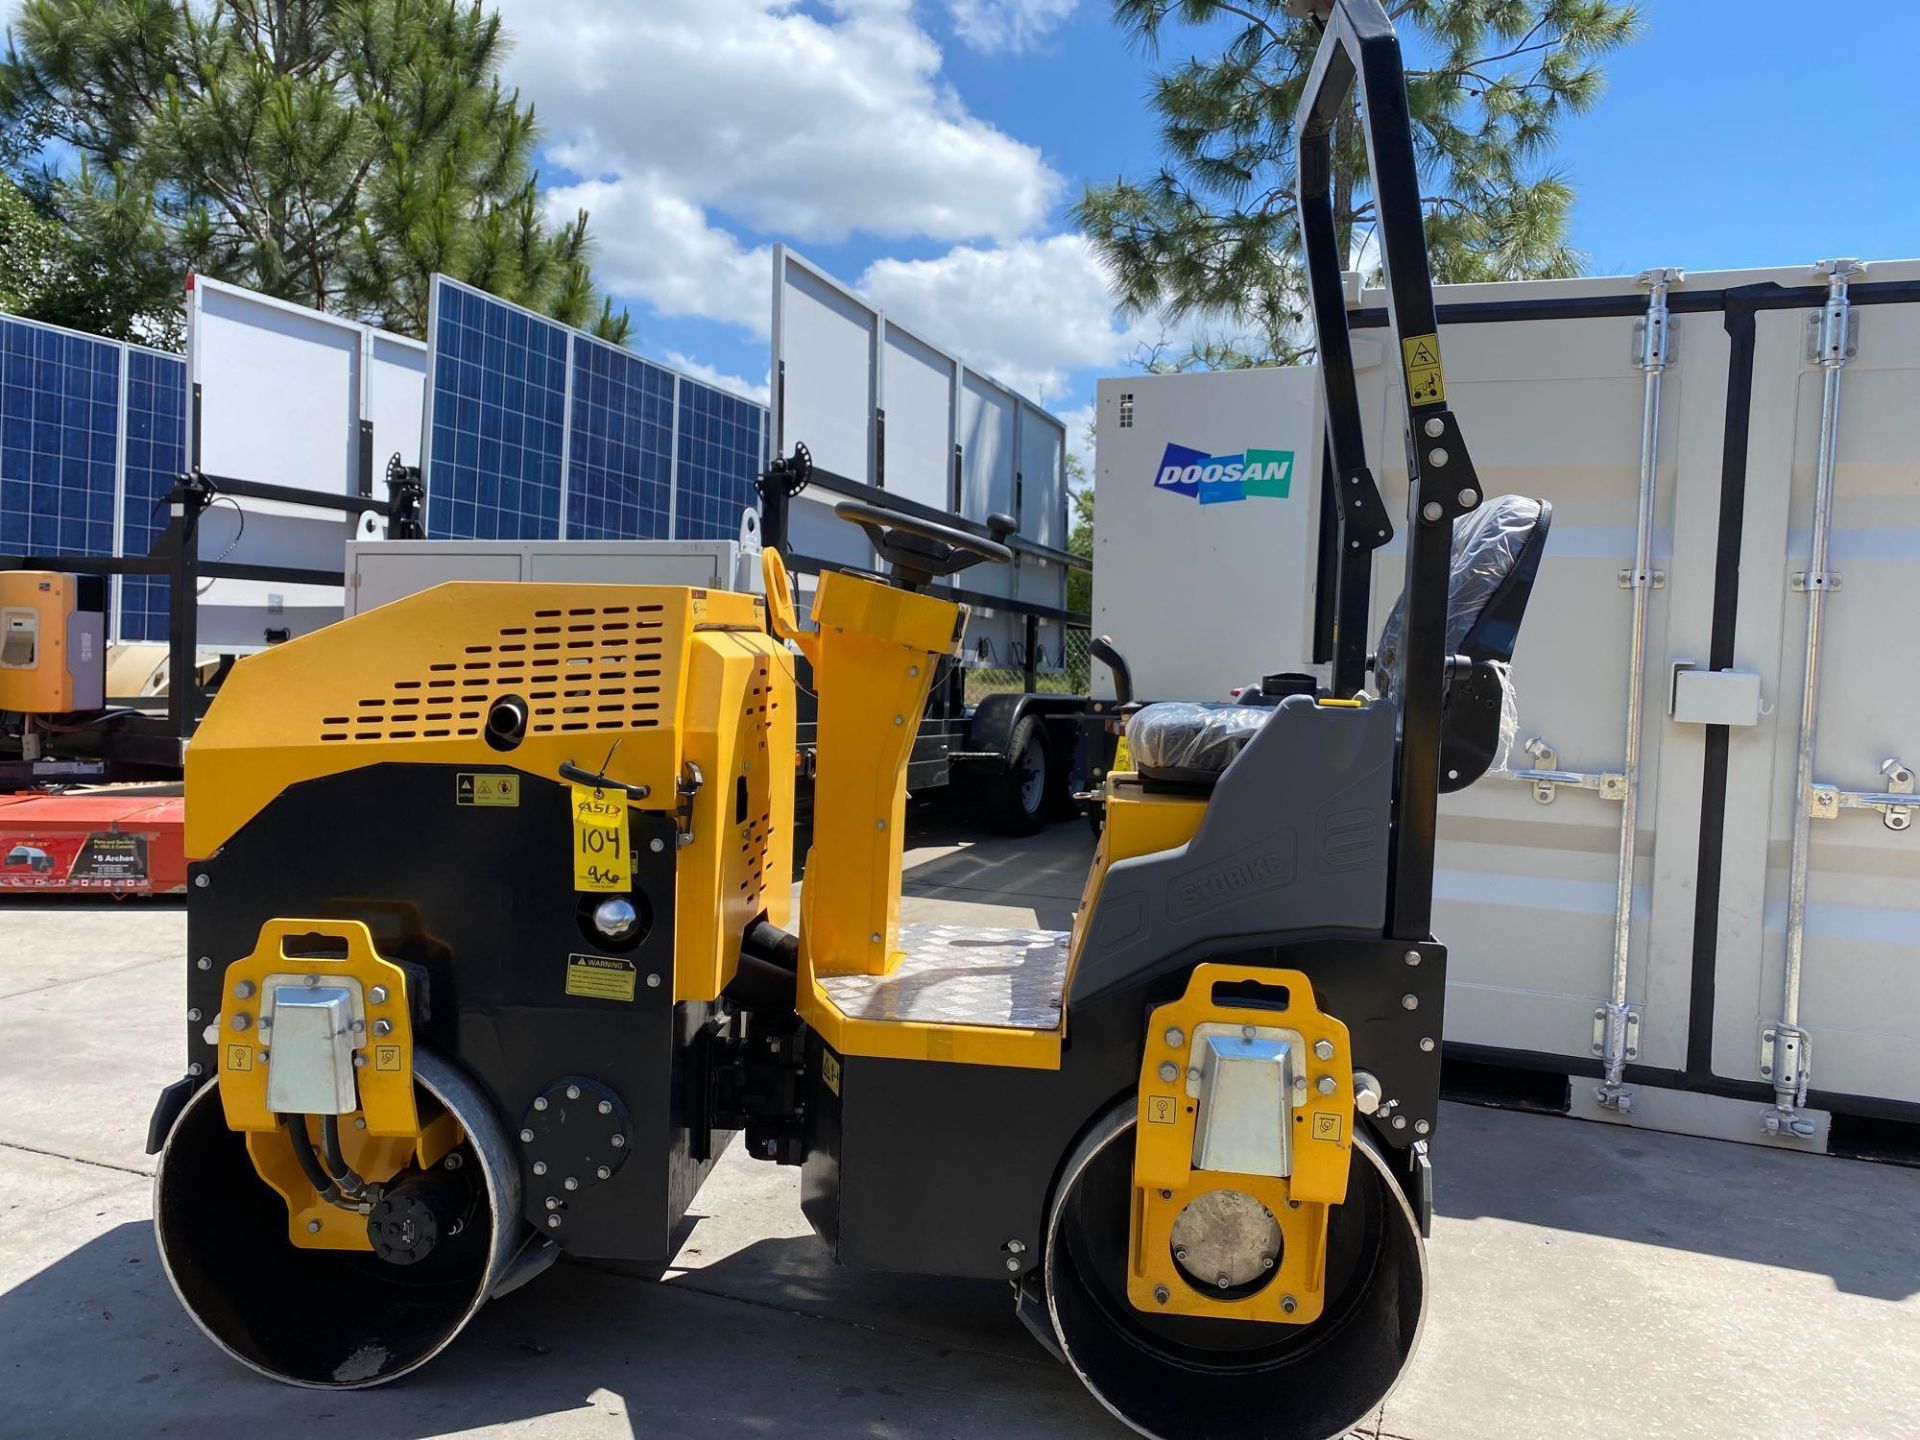 2019 STORKIE ROLLER, DOUBLE DRUM, GAS ENGINE, ELECTRIC START, WATER SYSTEM, RUNS AND OPERATES - Image 2 of 8